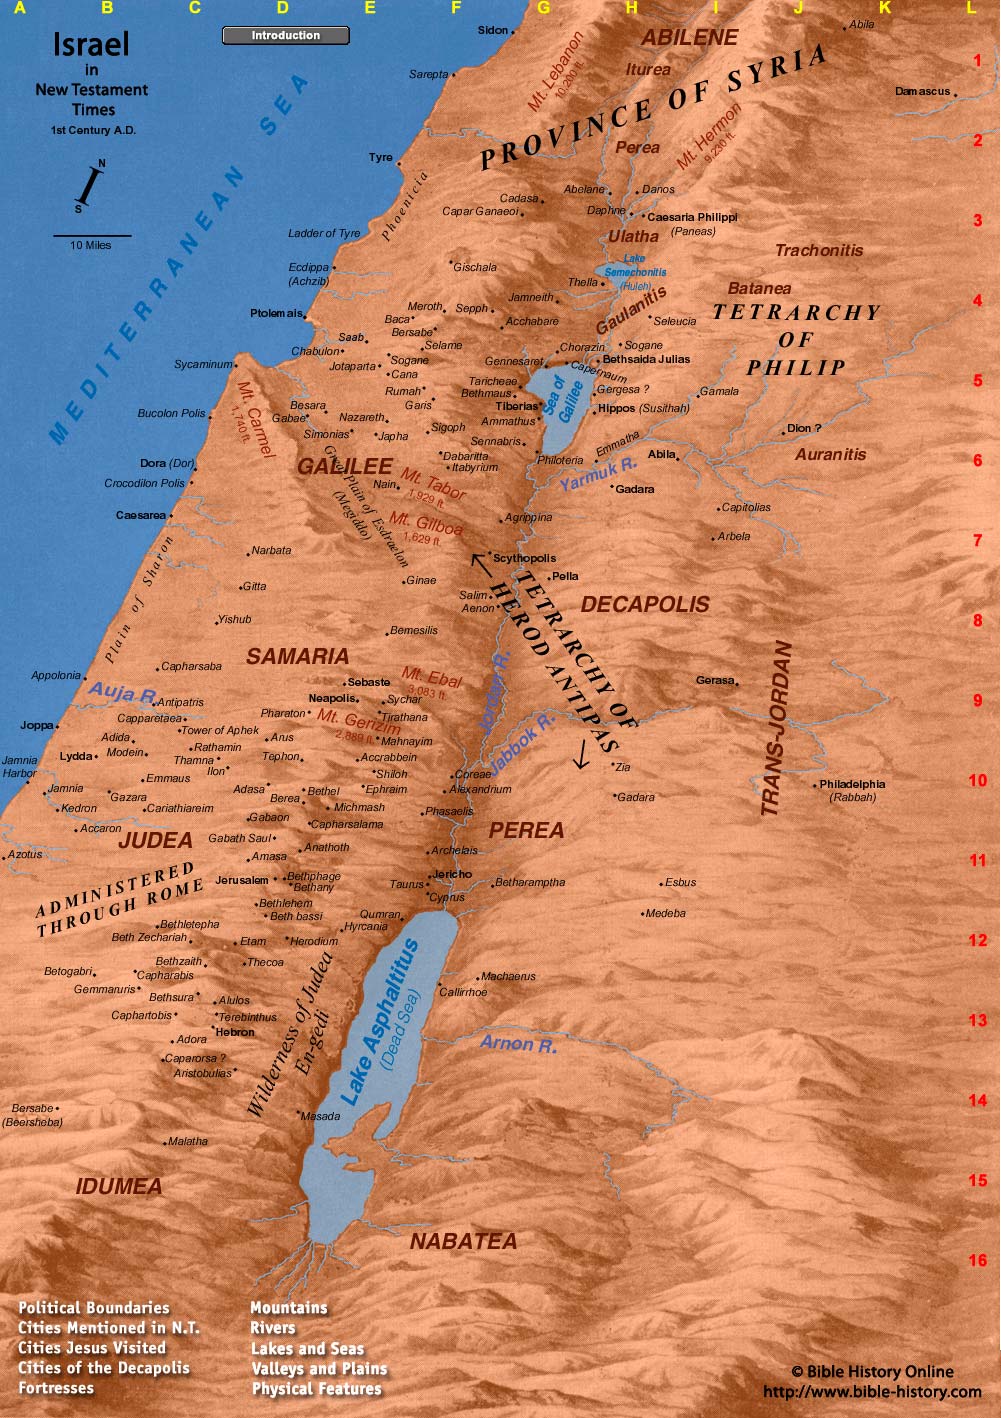 Map of Israel in New Testament Times [IMG]